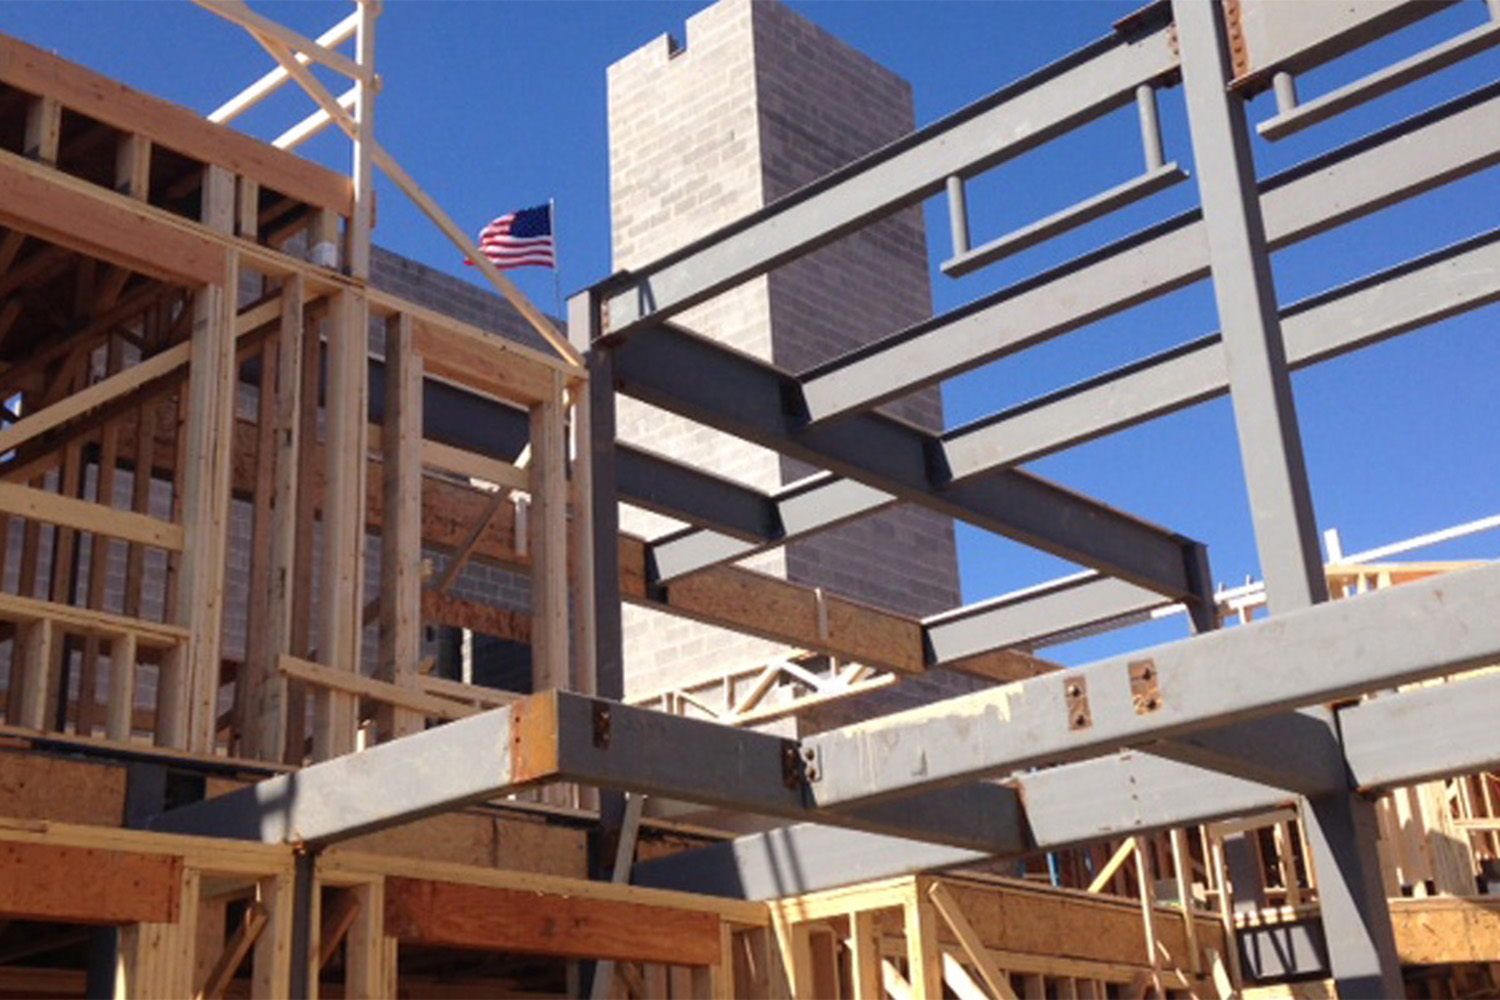 worm's eye view of building frame, with American flag waving 